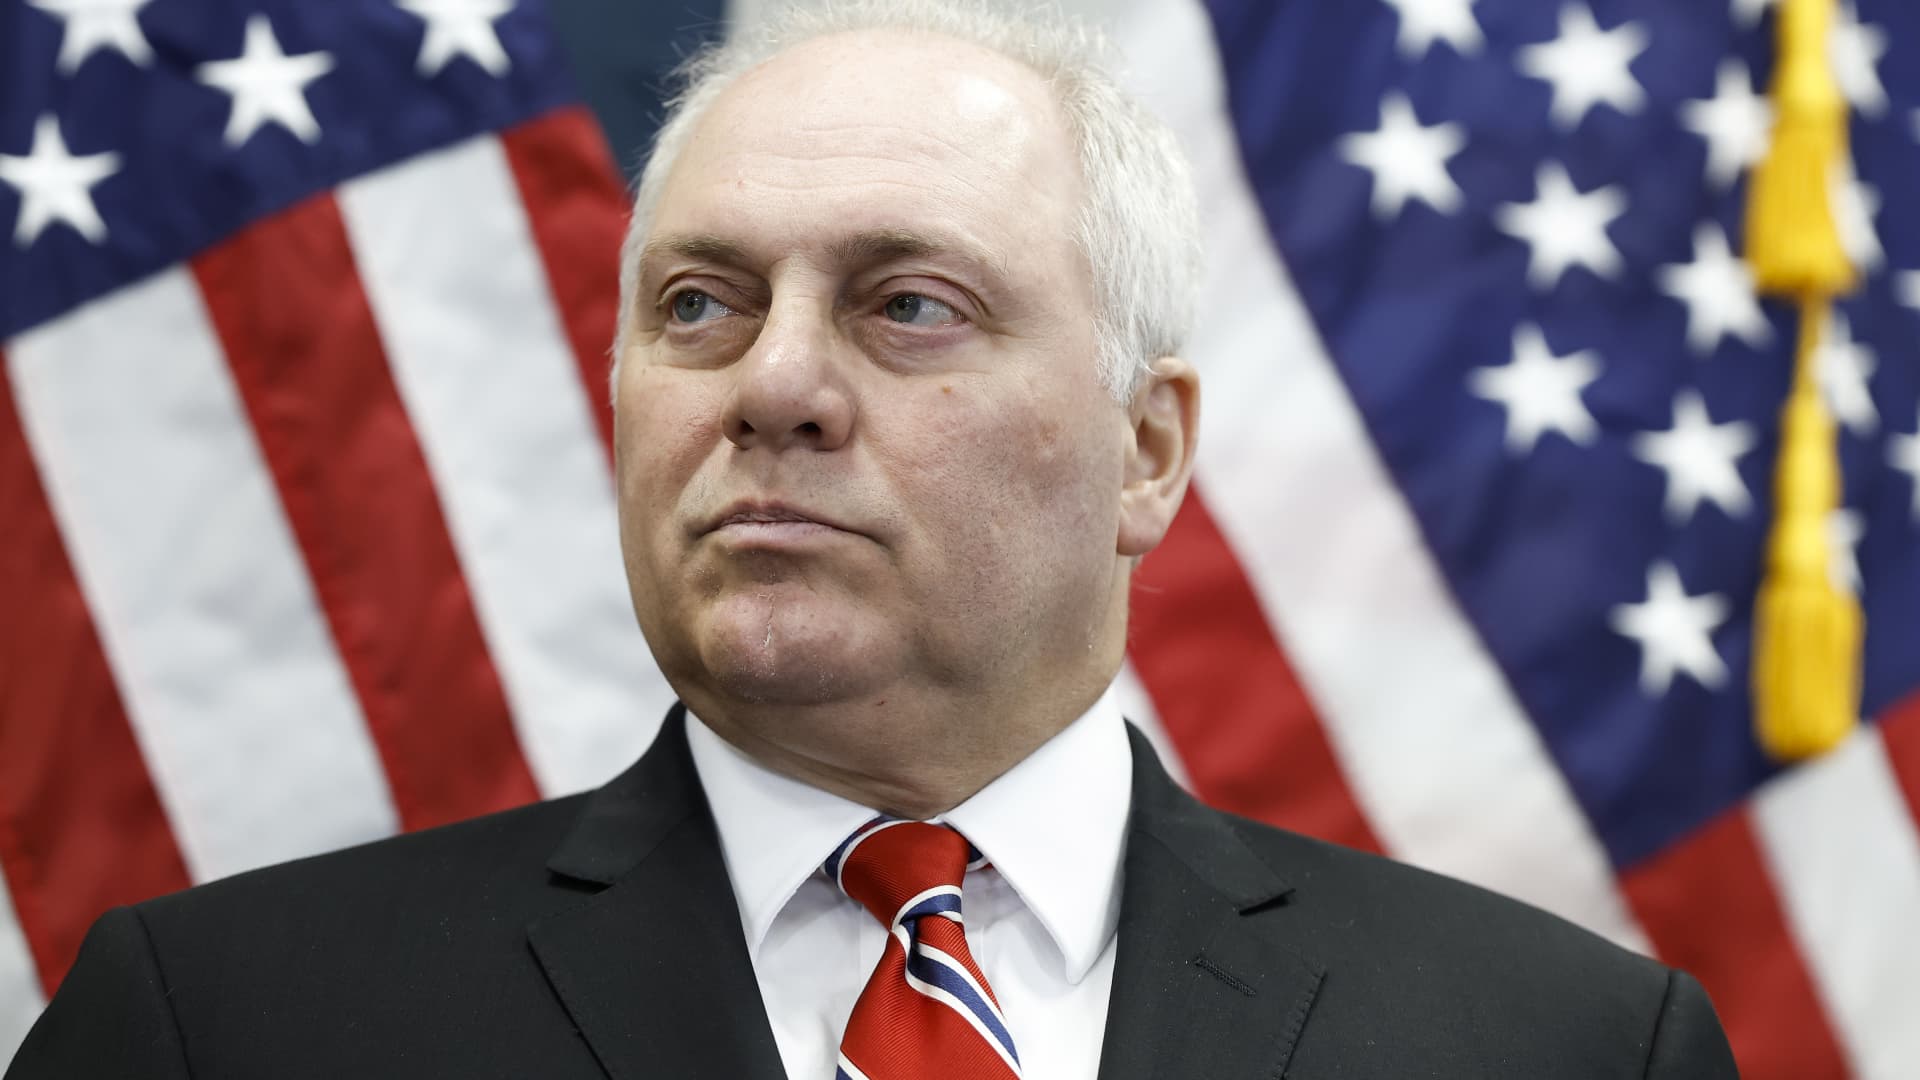 Steve Scalise nominated as Condominium speaker candidate by GOP lawmakers